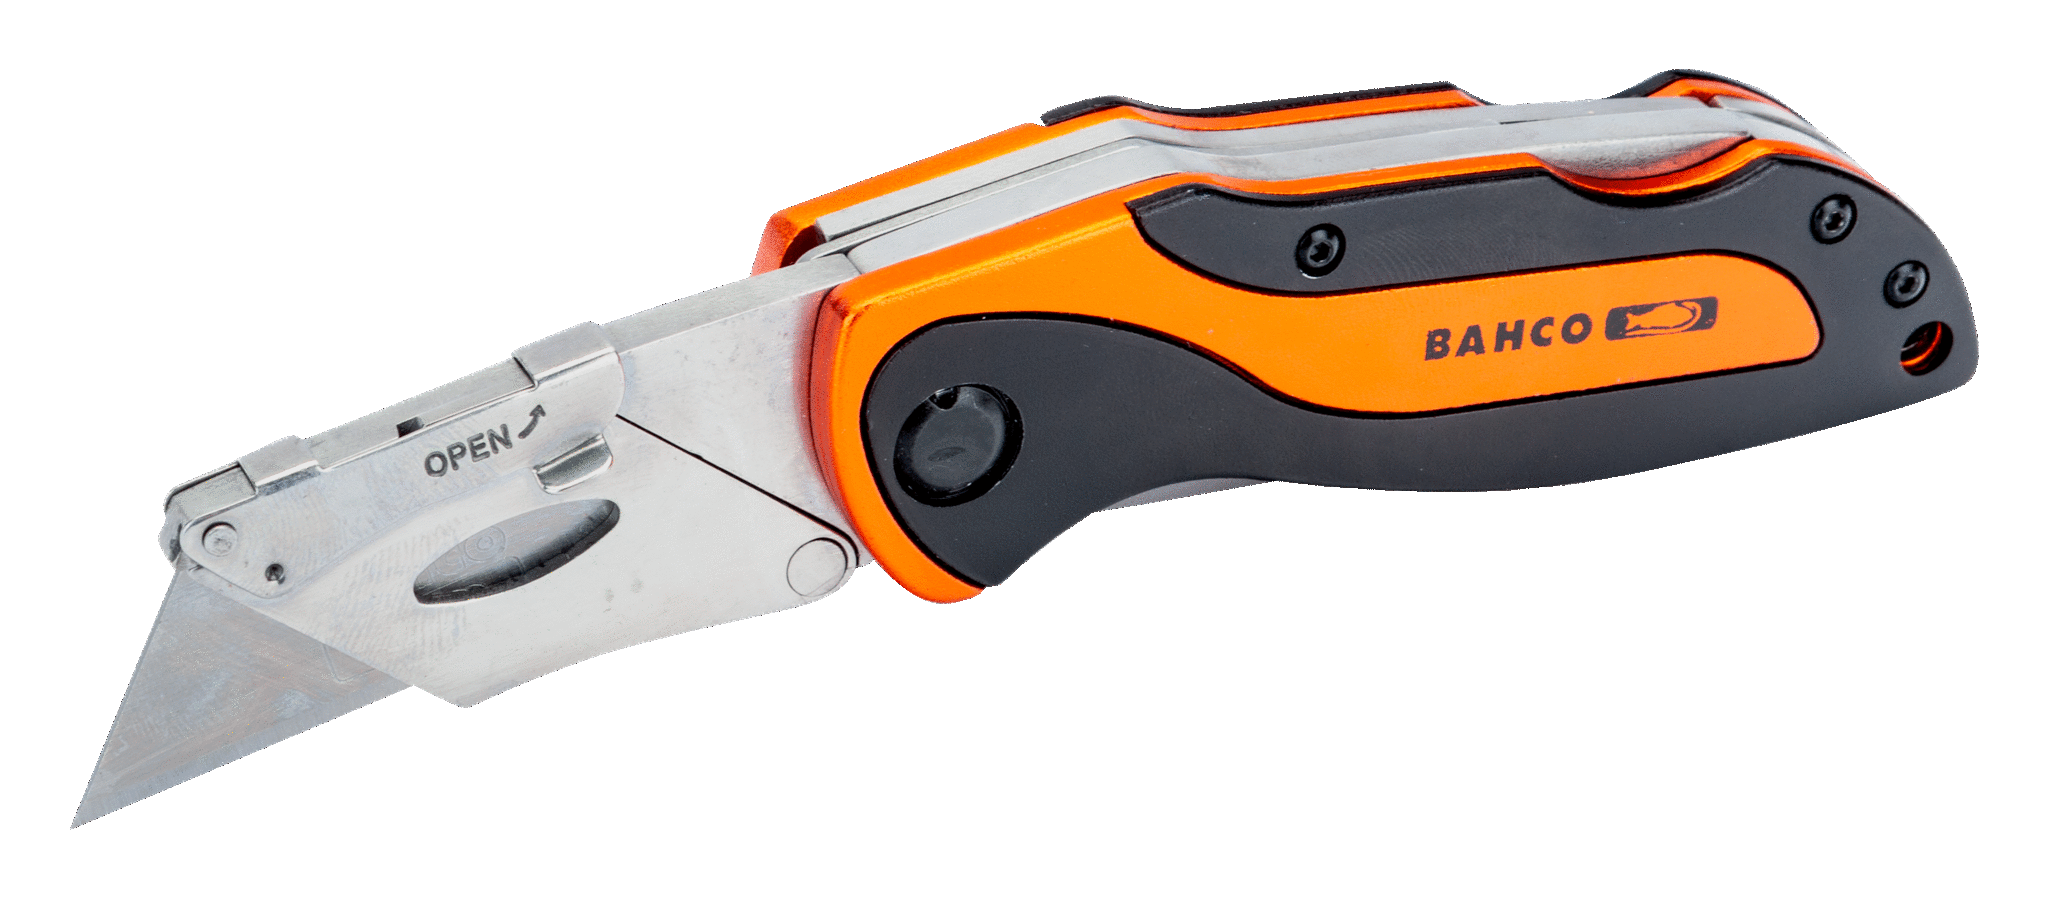 Sports Foldable Utility Knives with Aluminium Handle & Twin Blades - KBTU-01 by Bahco